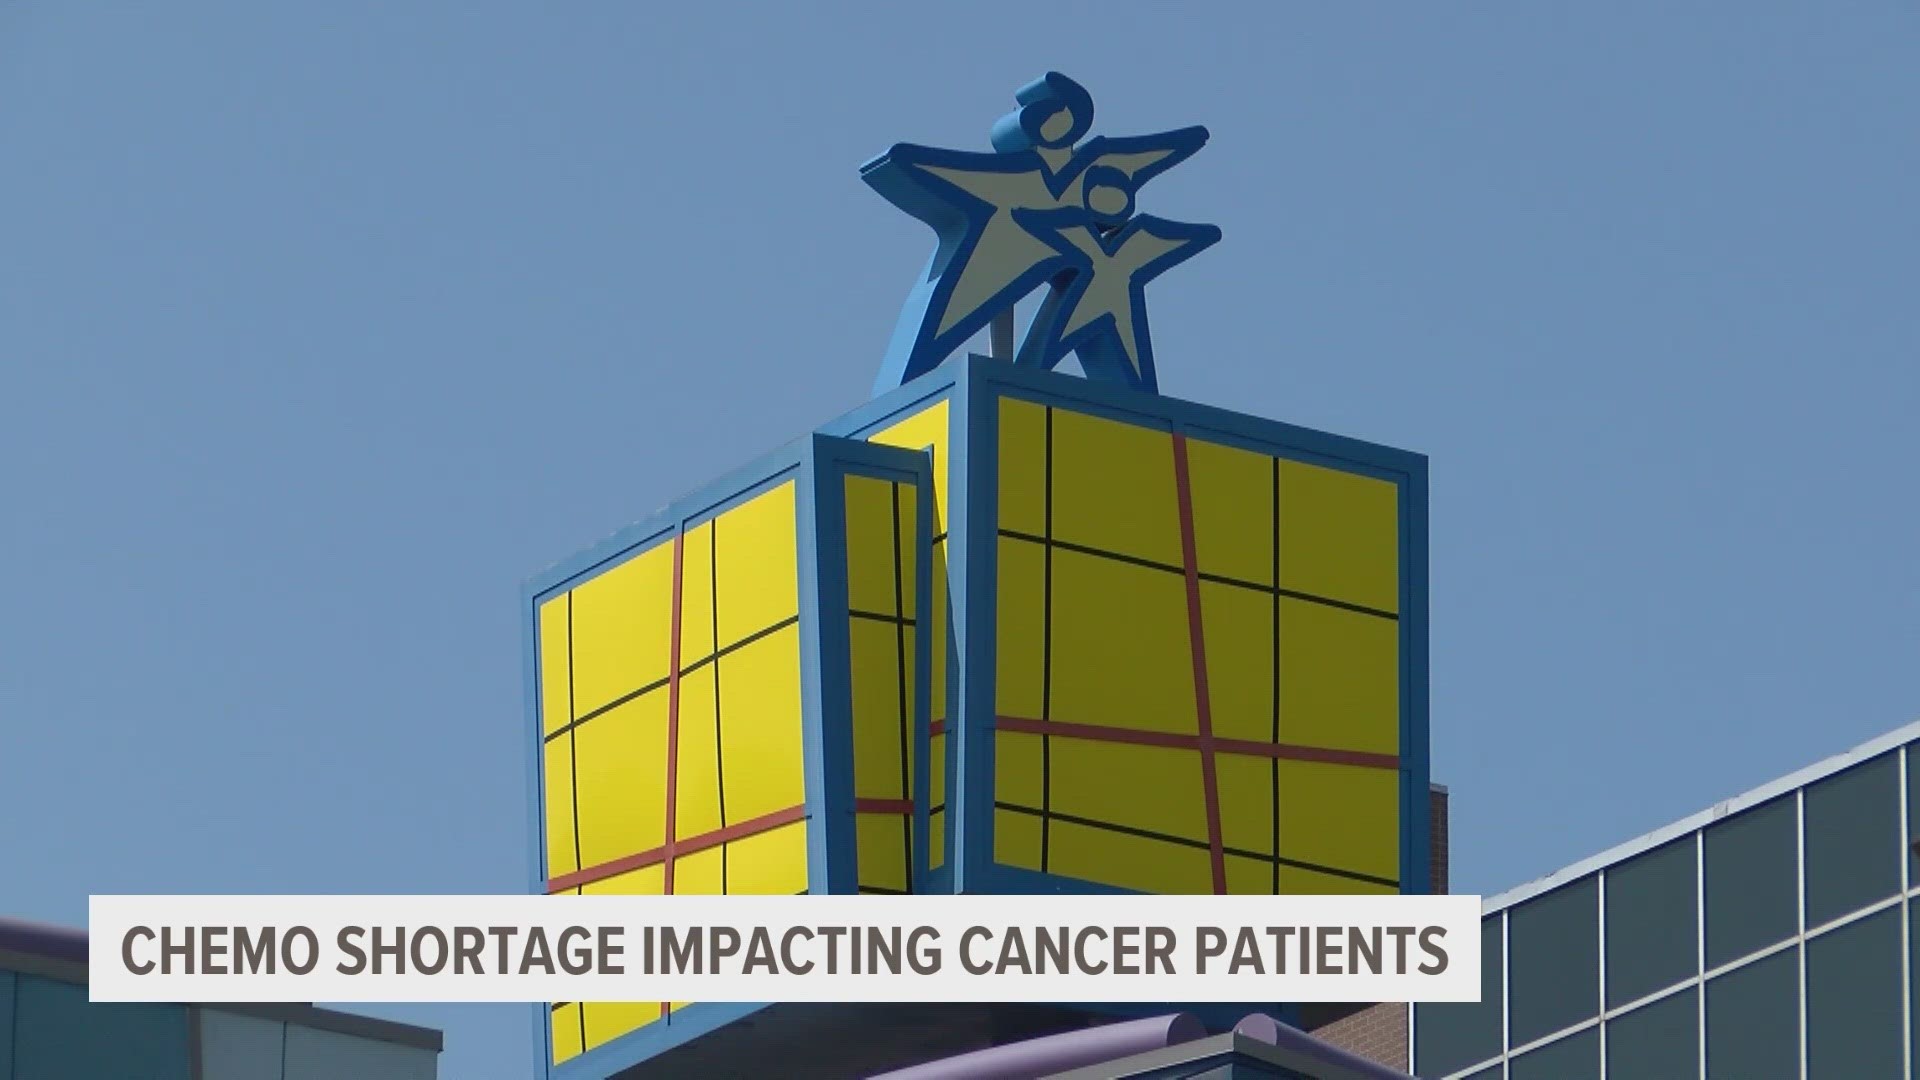 The shortage is impacting all types of cancer patients of all ages.